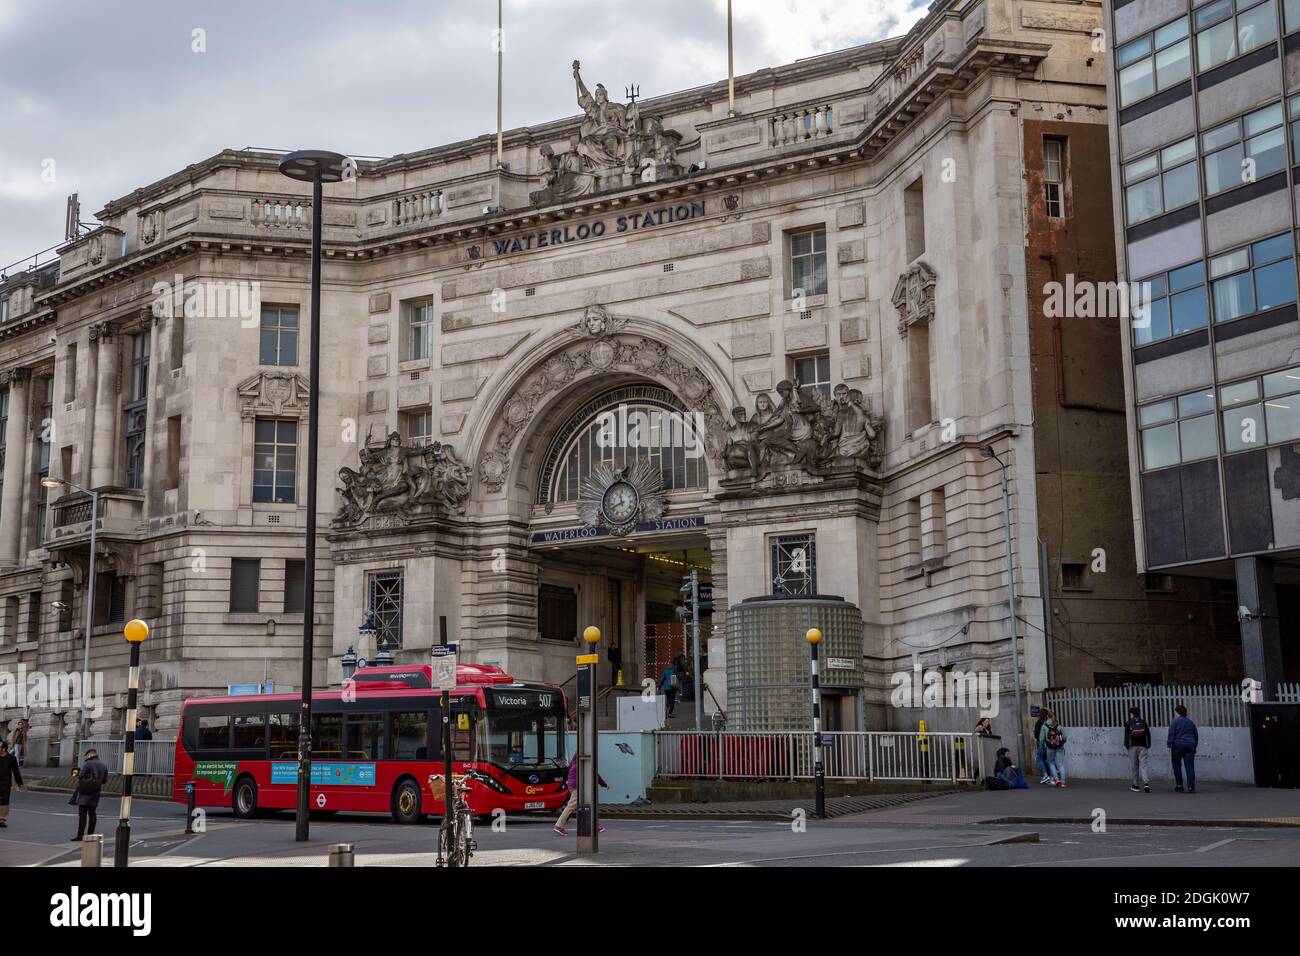 London, UK - March 25, 2019: Waterloo station is the terminus of the South Western main line to Weymouth via Southampton, the West of England main lin Stock Photo